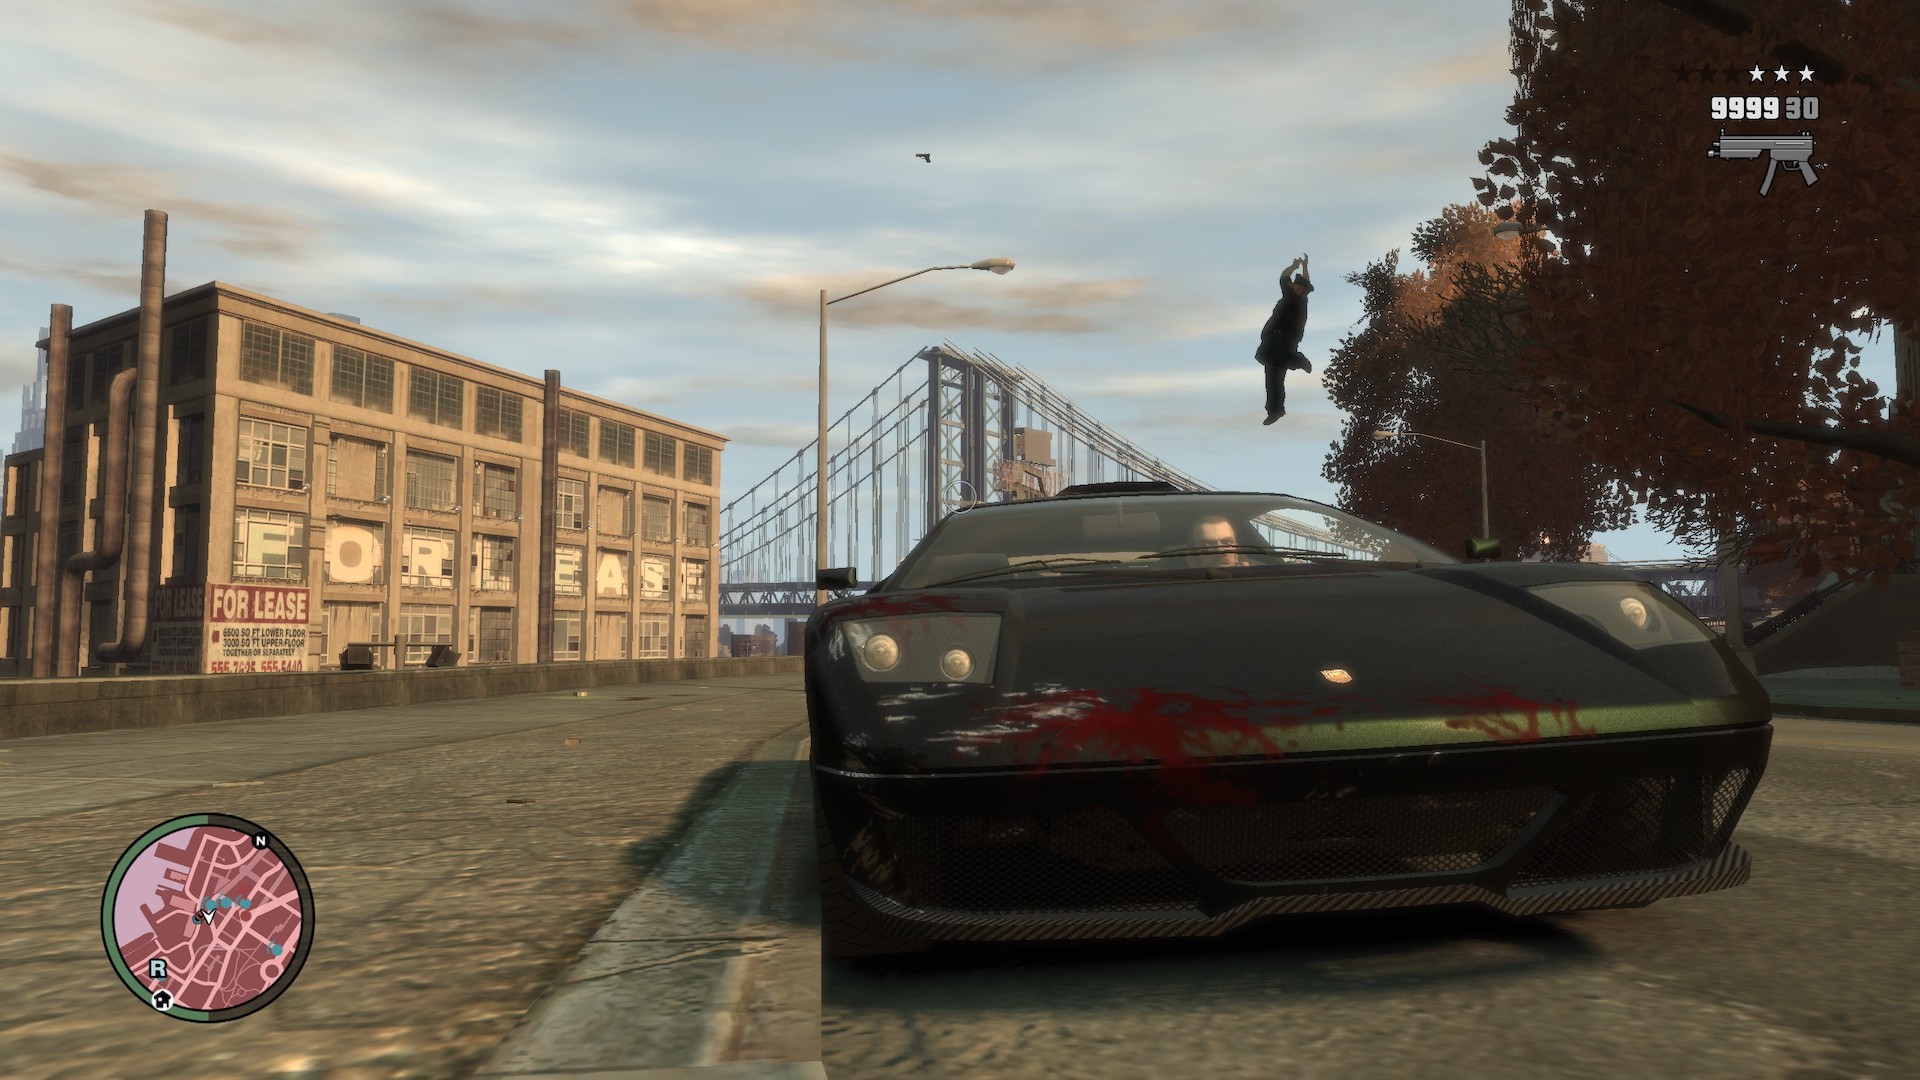 GTA IV in Liberty City with a policeman in the air